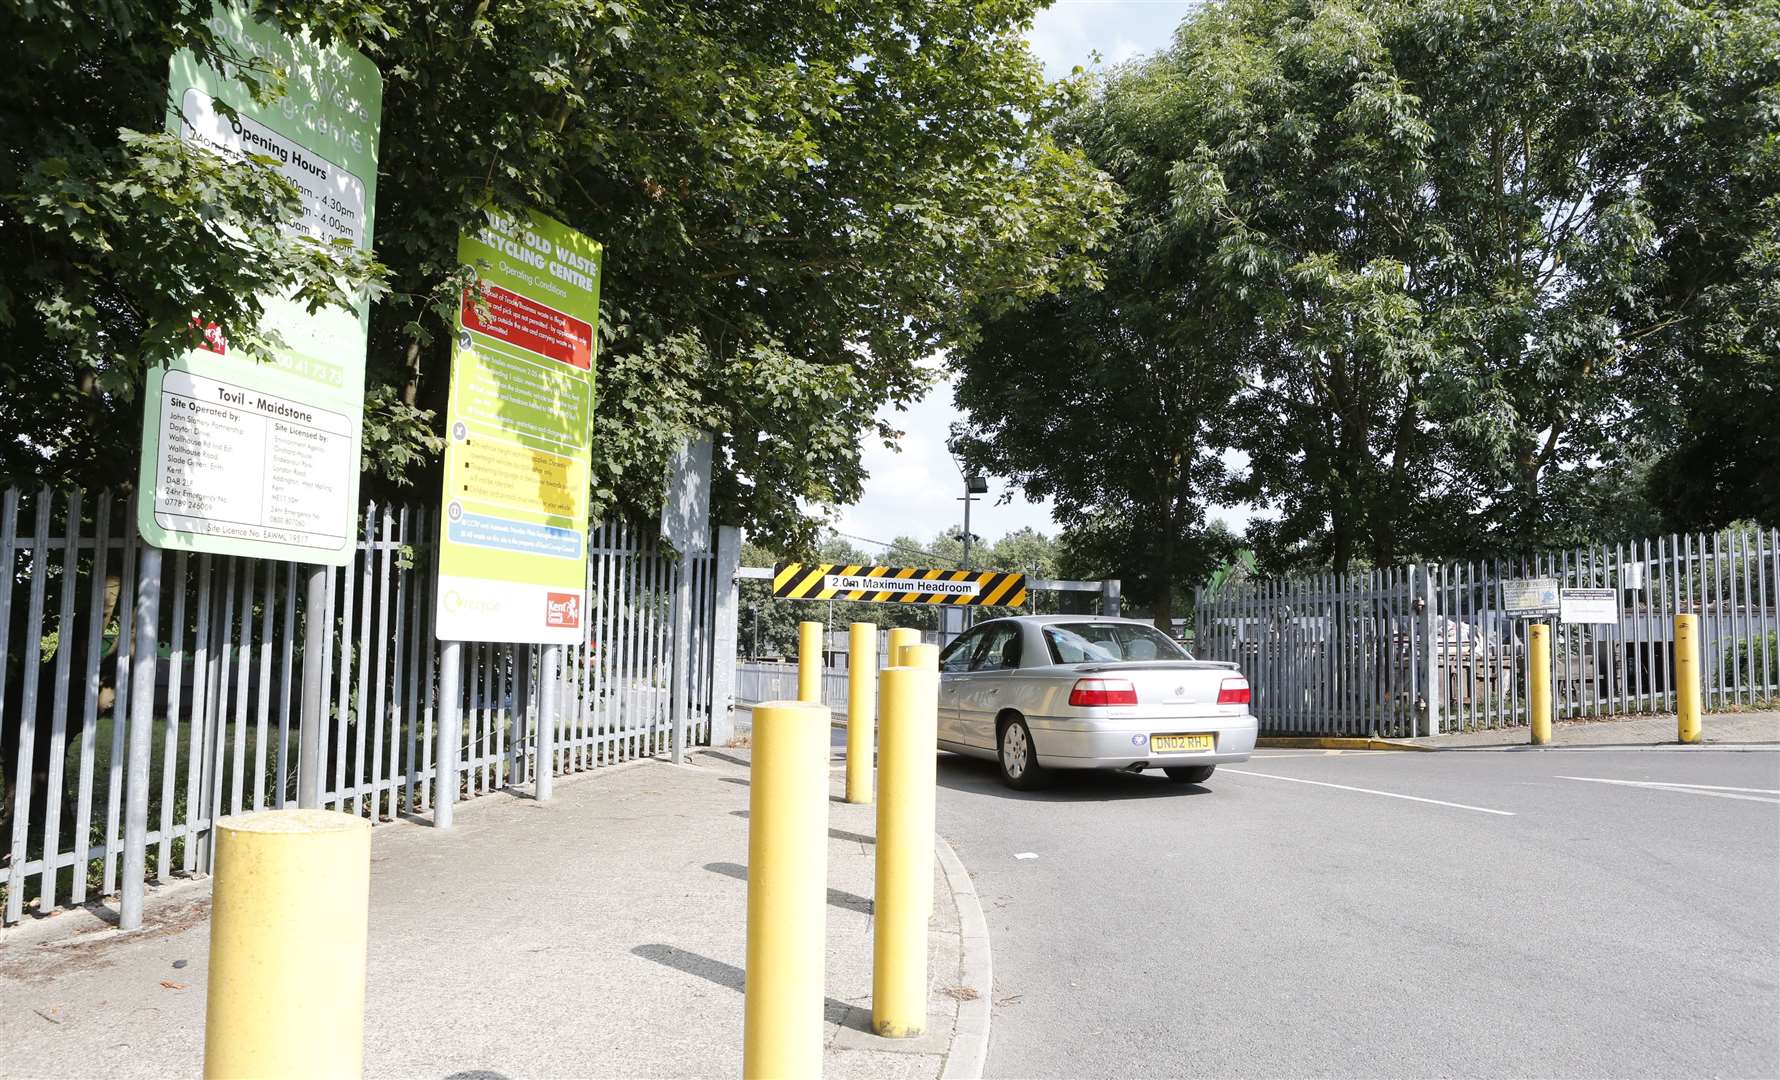 The Tovil recycling centre in Maidstone is one of the busiest in Kent but could permanently close